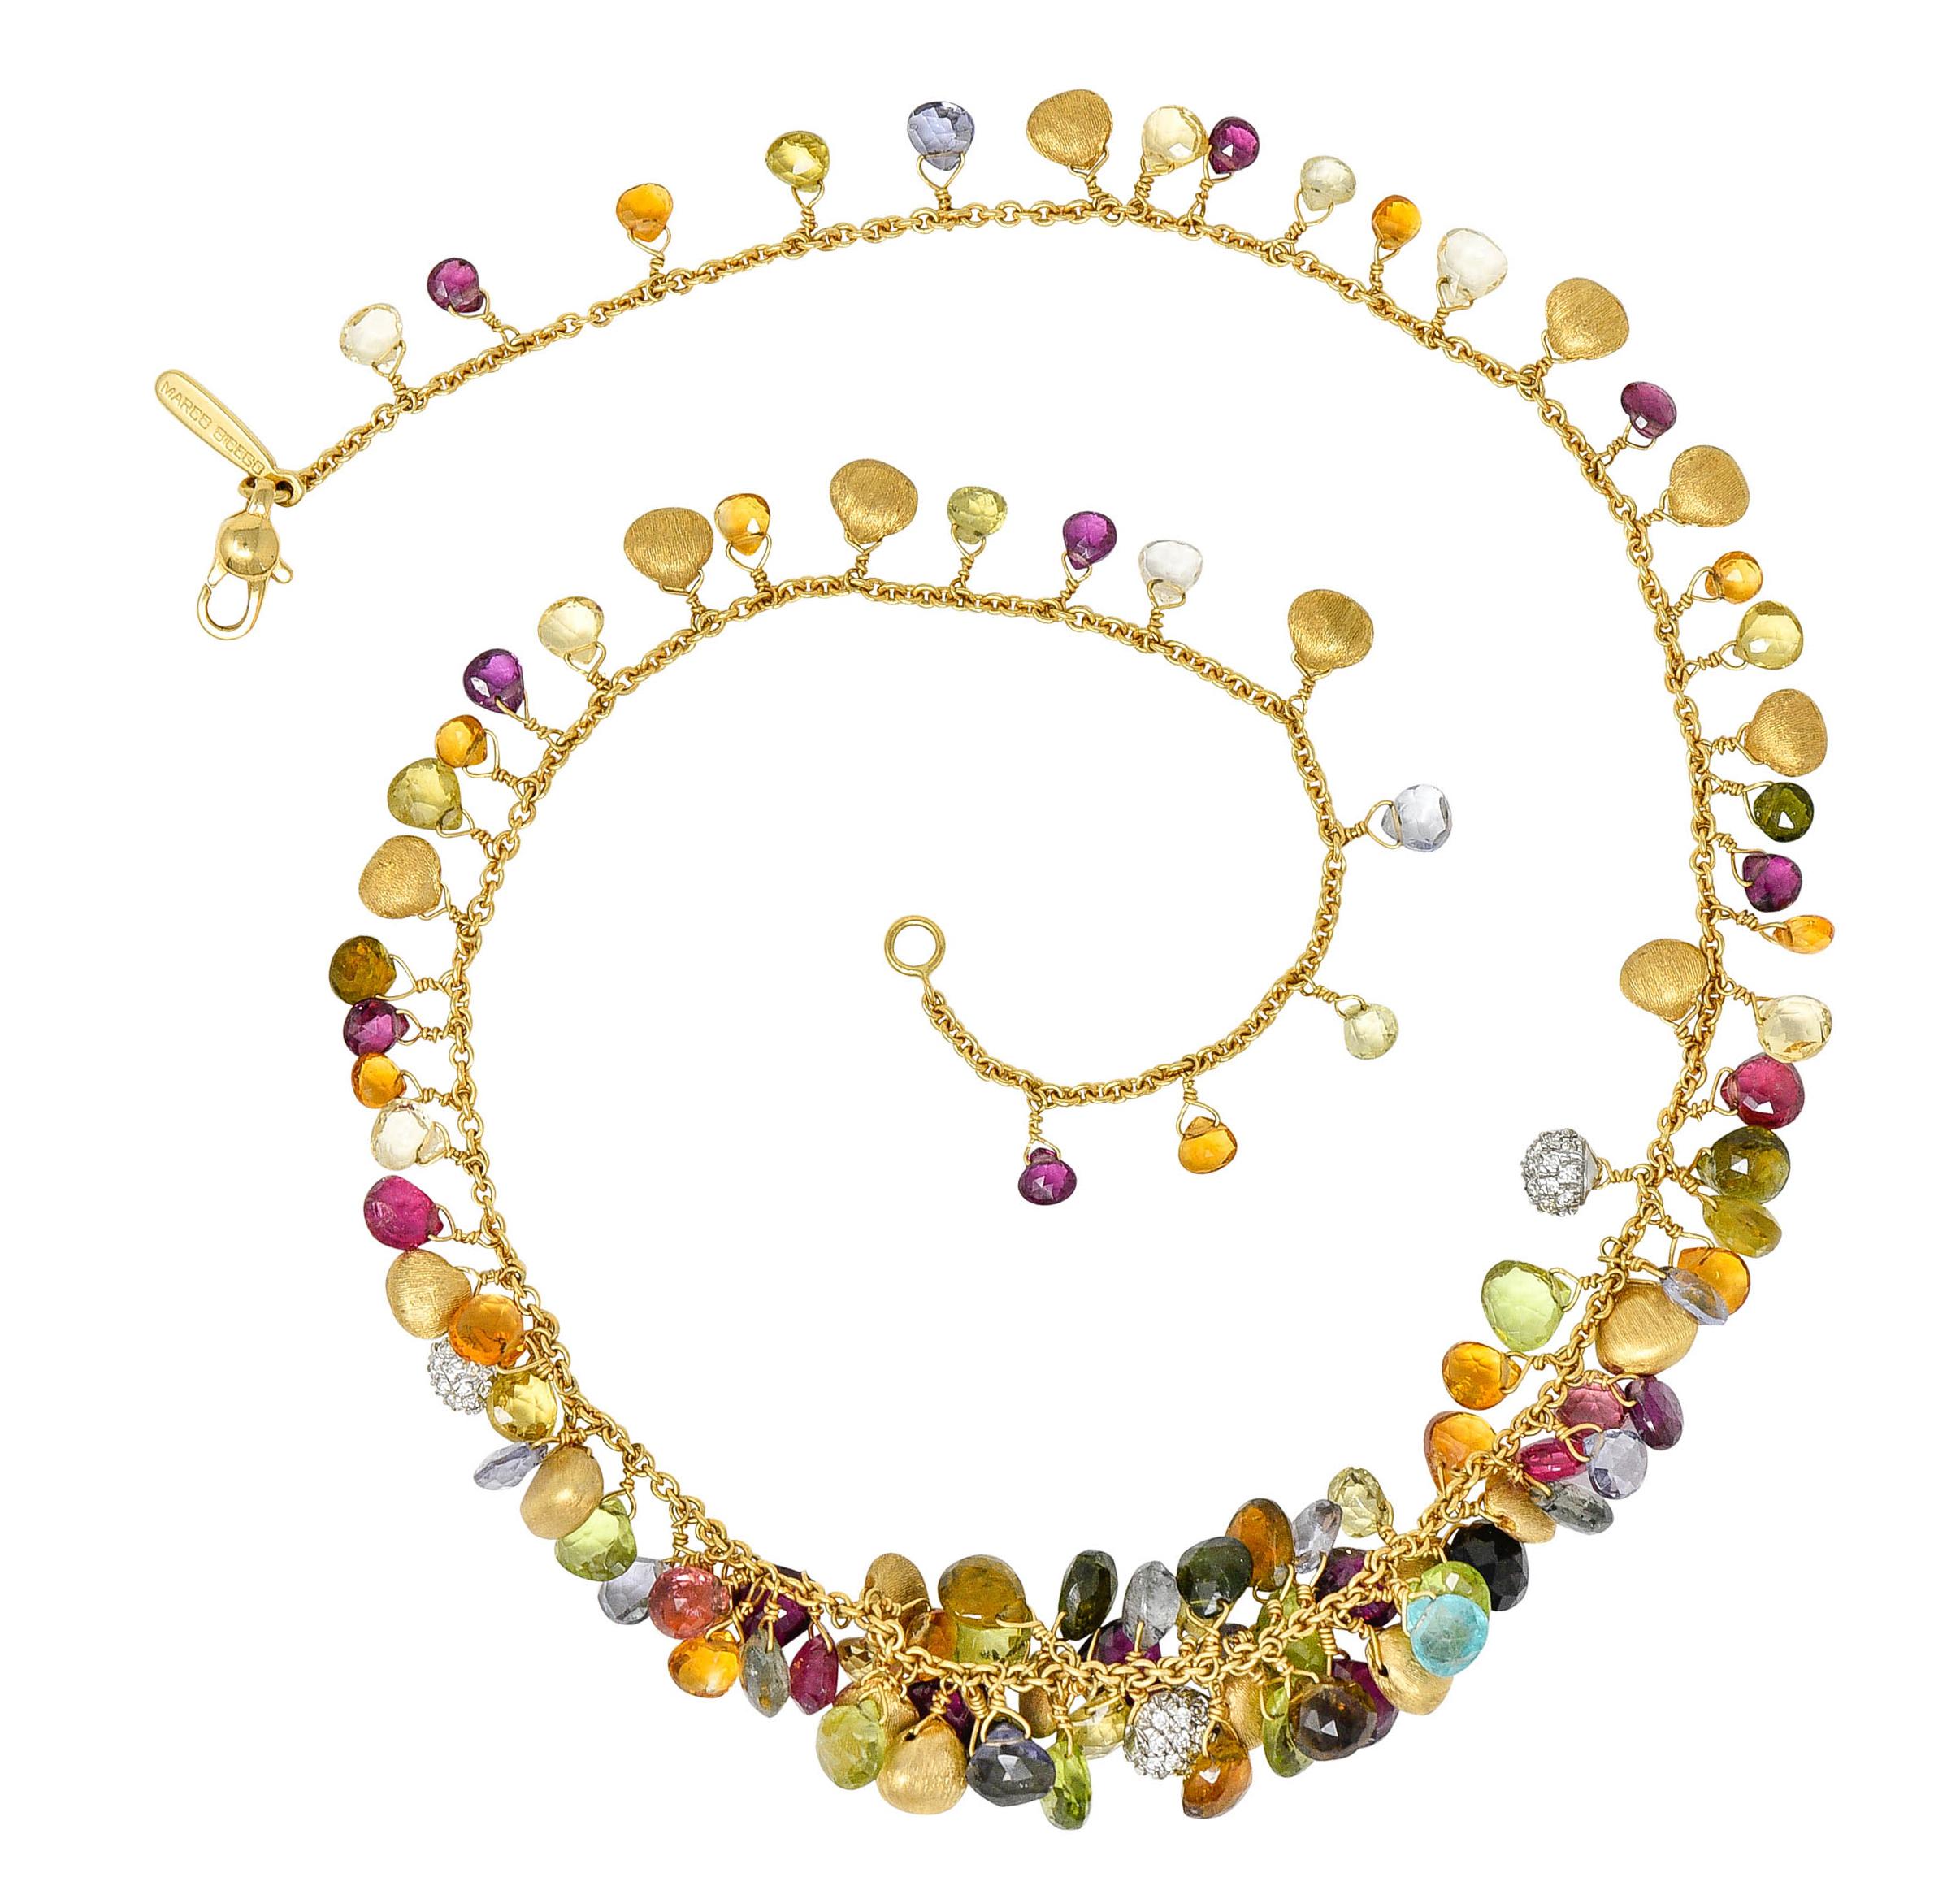 Classic cable chain necklace intermittently features brushed gold drops, pavè diamond drops, and faceted gemstone drops

Gemstones are briolette cut citrine, tourmaline, peridot, garnet, topaz, and others

Total diamond weight is approximately 0.75